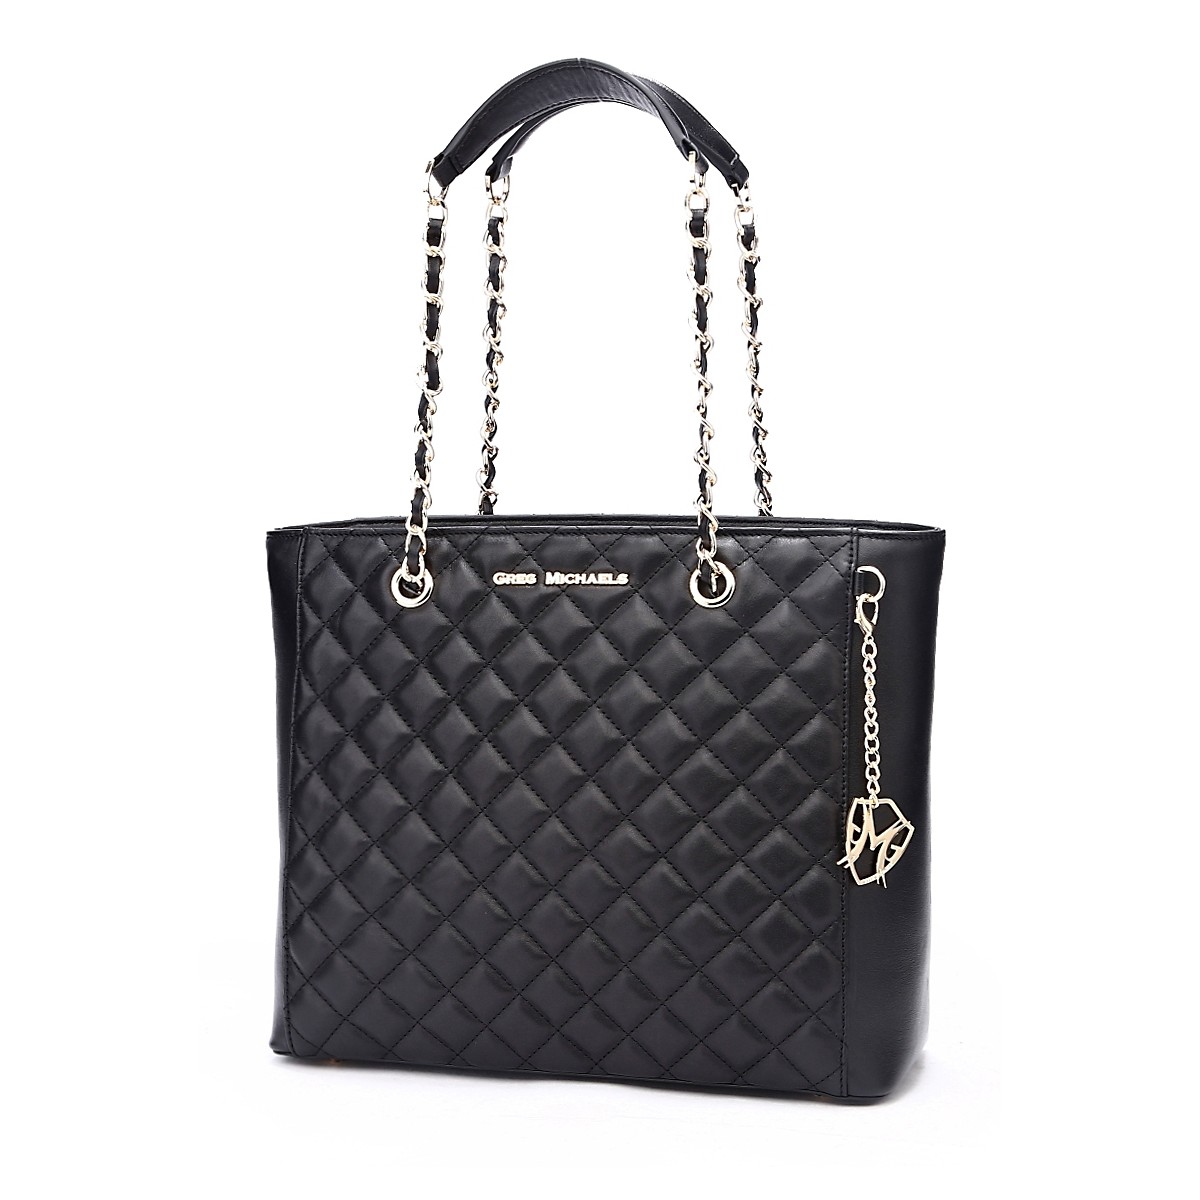 20141125-greg-michaels-nappa-leather-quilted-hannah-functional-chain-tote